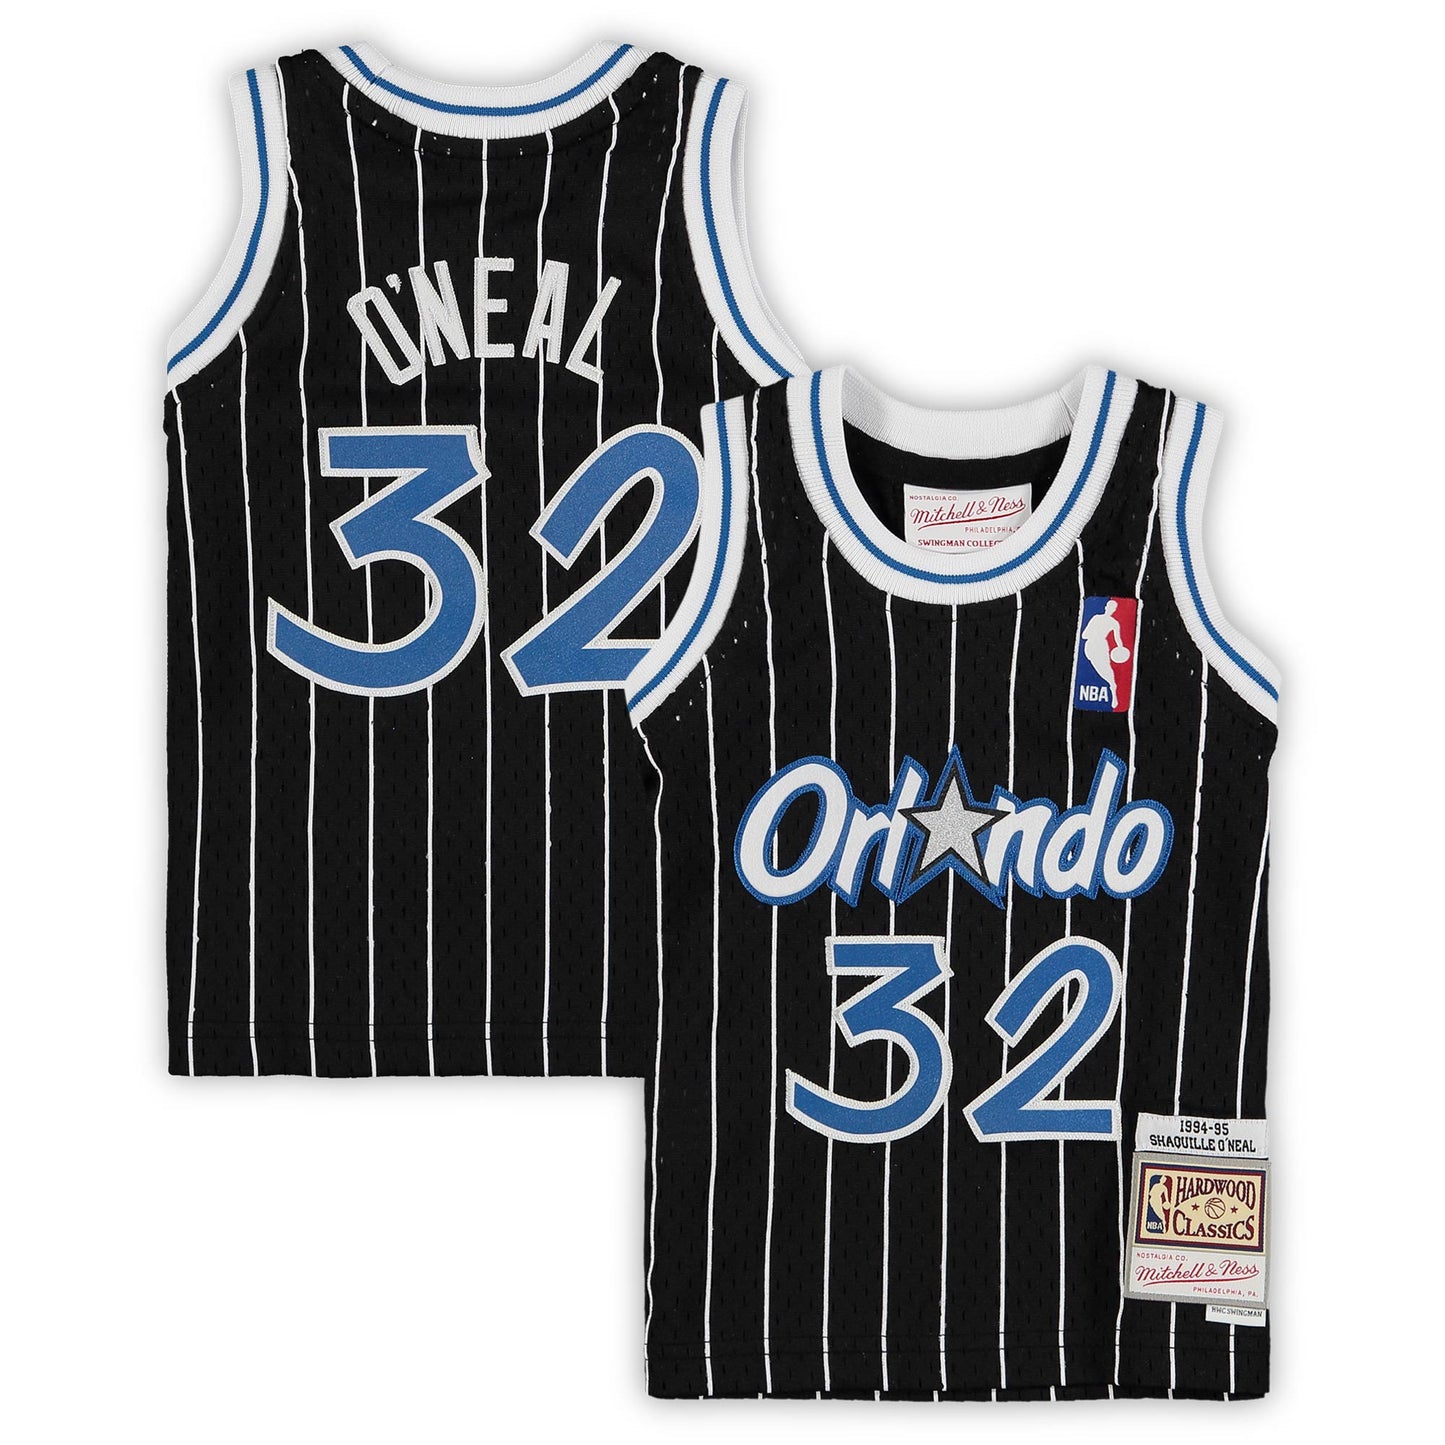 Shaquille O'Neal Orlando Magic Mitchell & Ness Infant 1994/95 Hardwood Classics Retired Player Jersey - Black